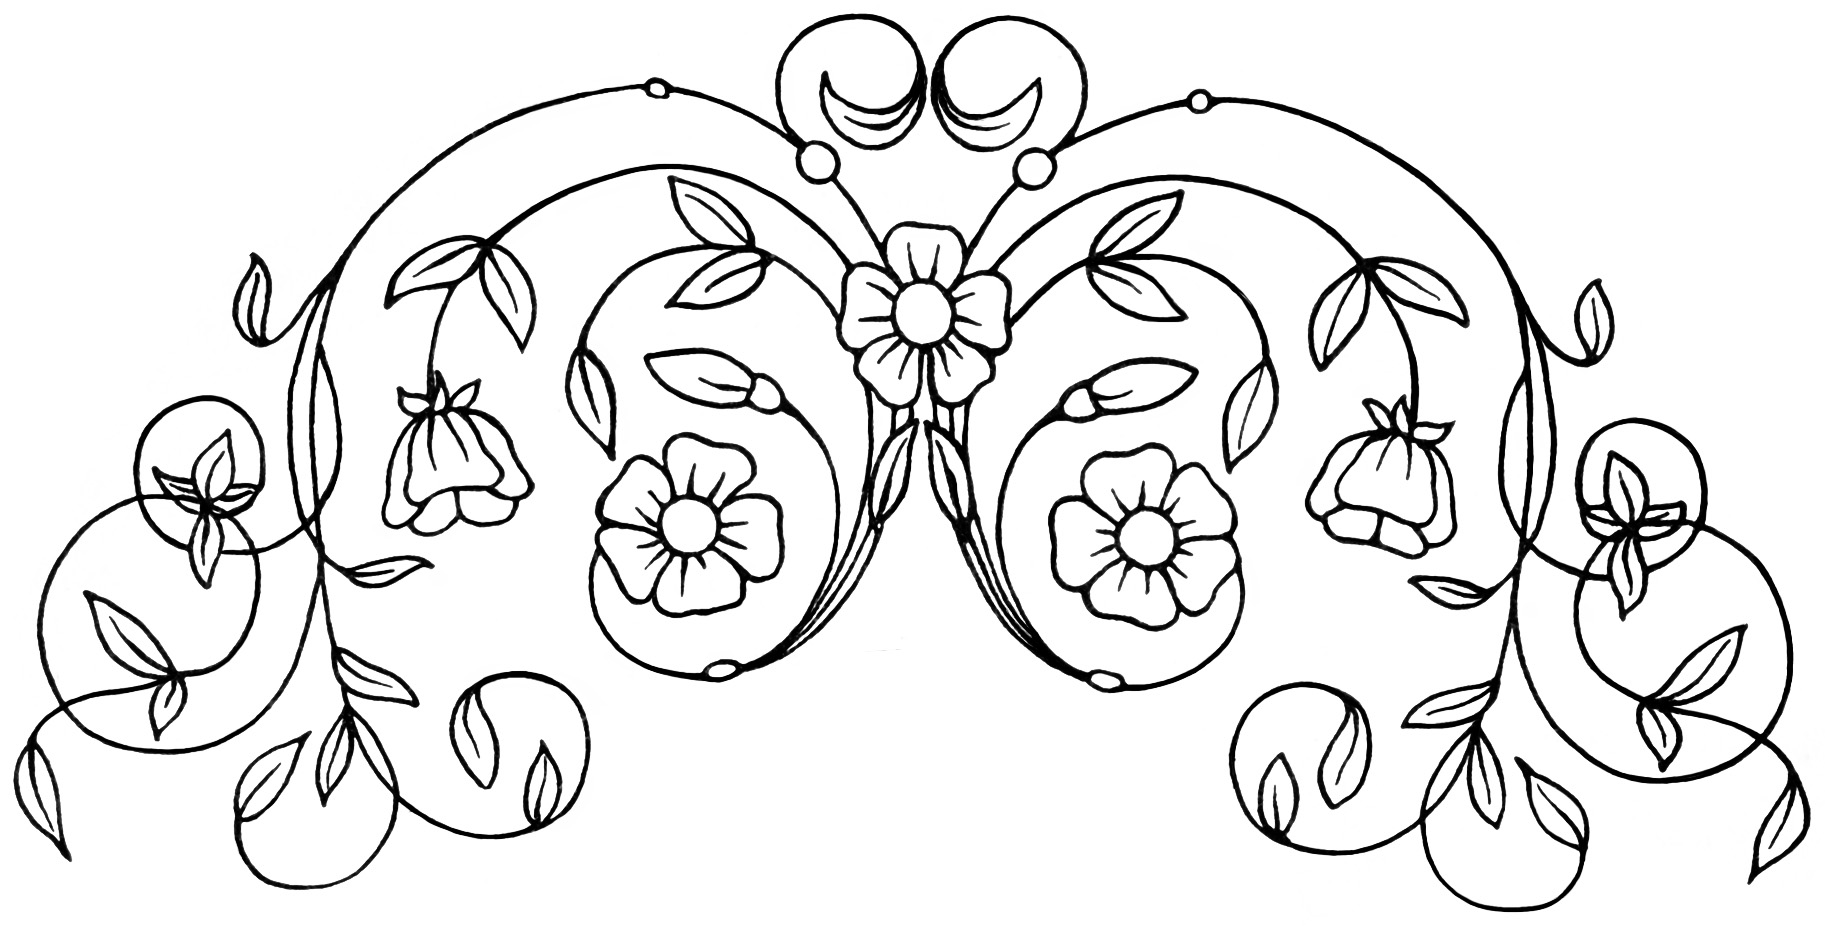 Free Vintage Image Old Embroidery Design Free Vintage Clipart Swirl